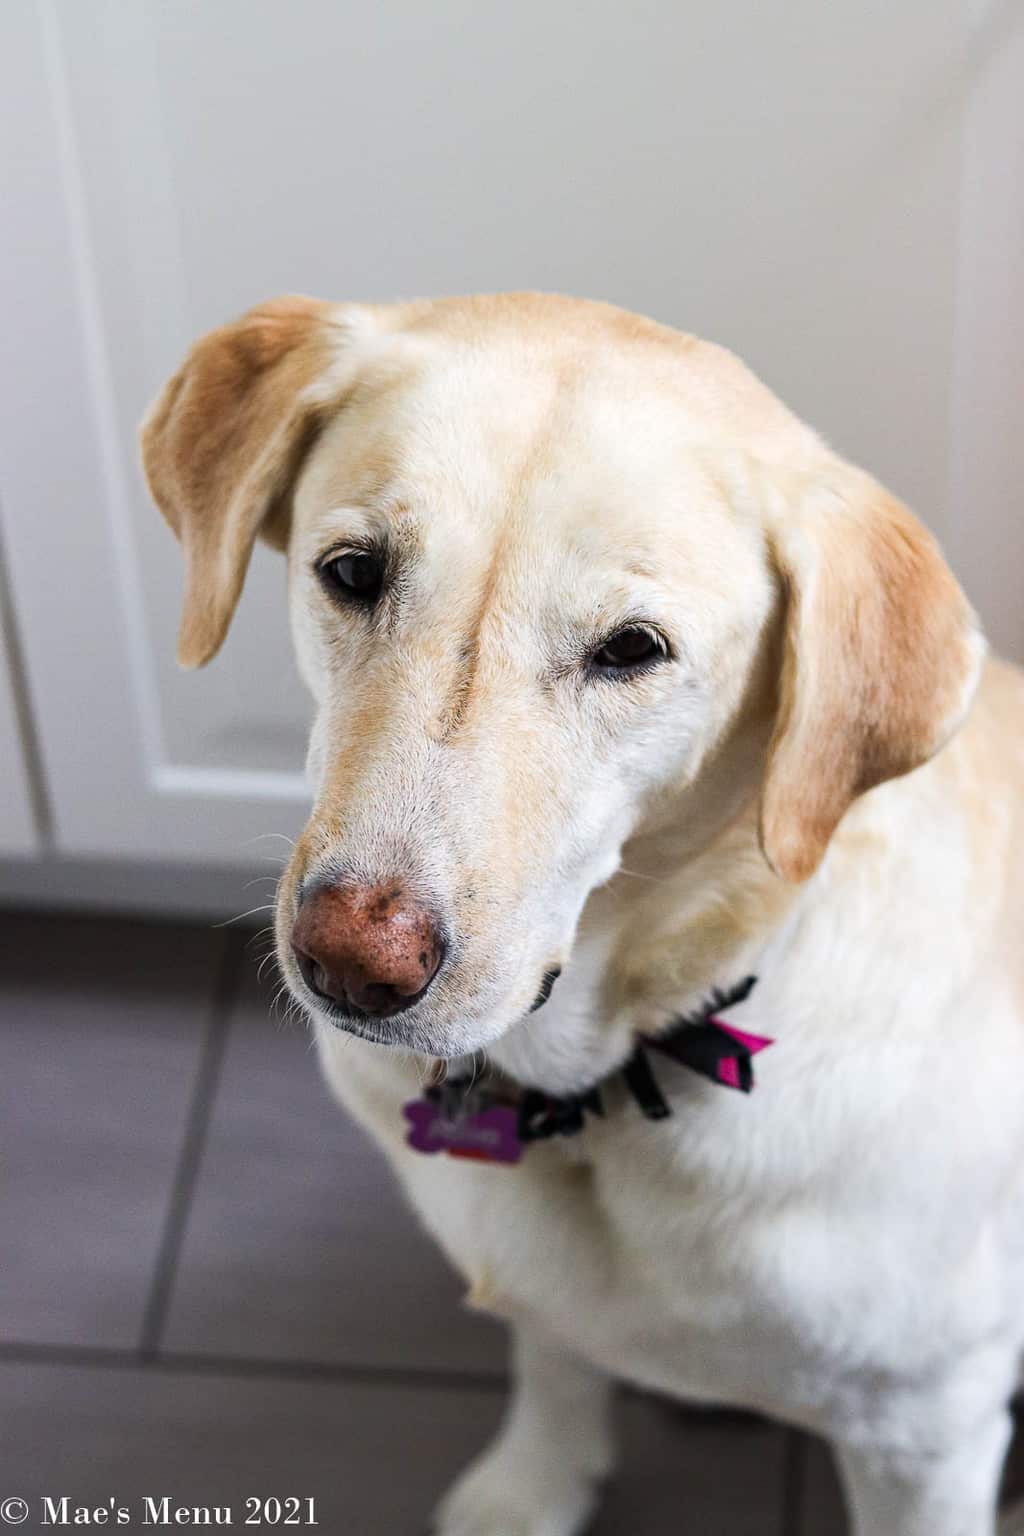 Allie, my yellow labrador, begging for pancakes!